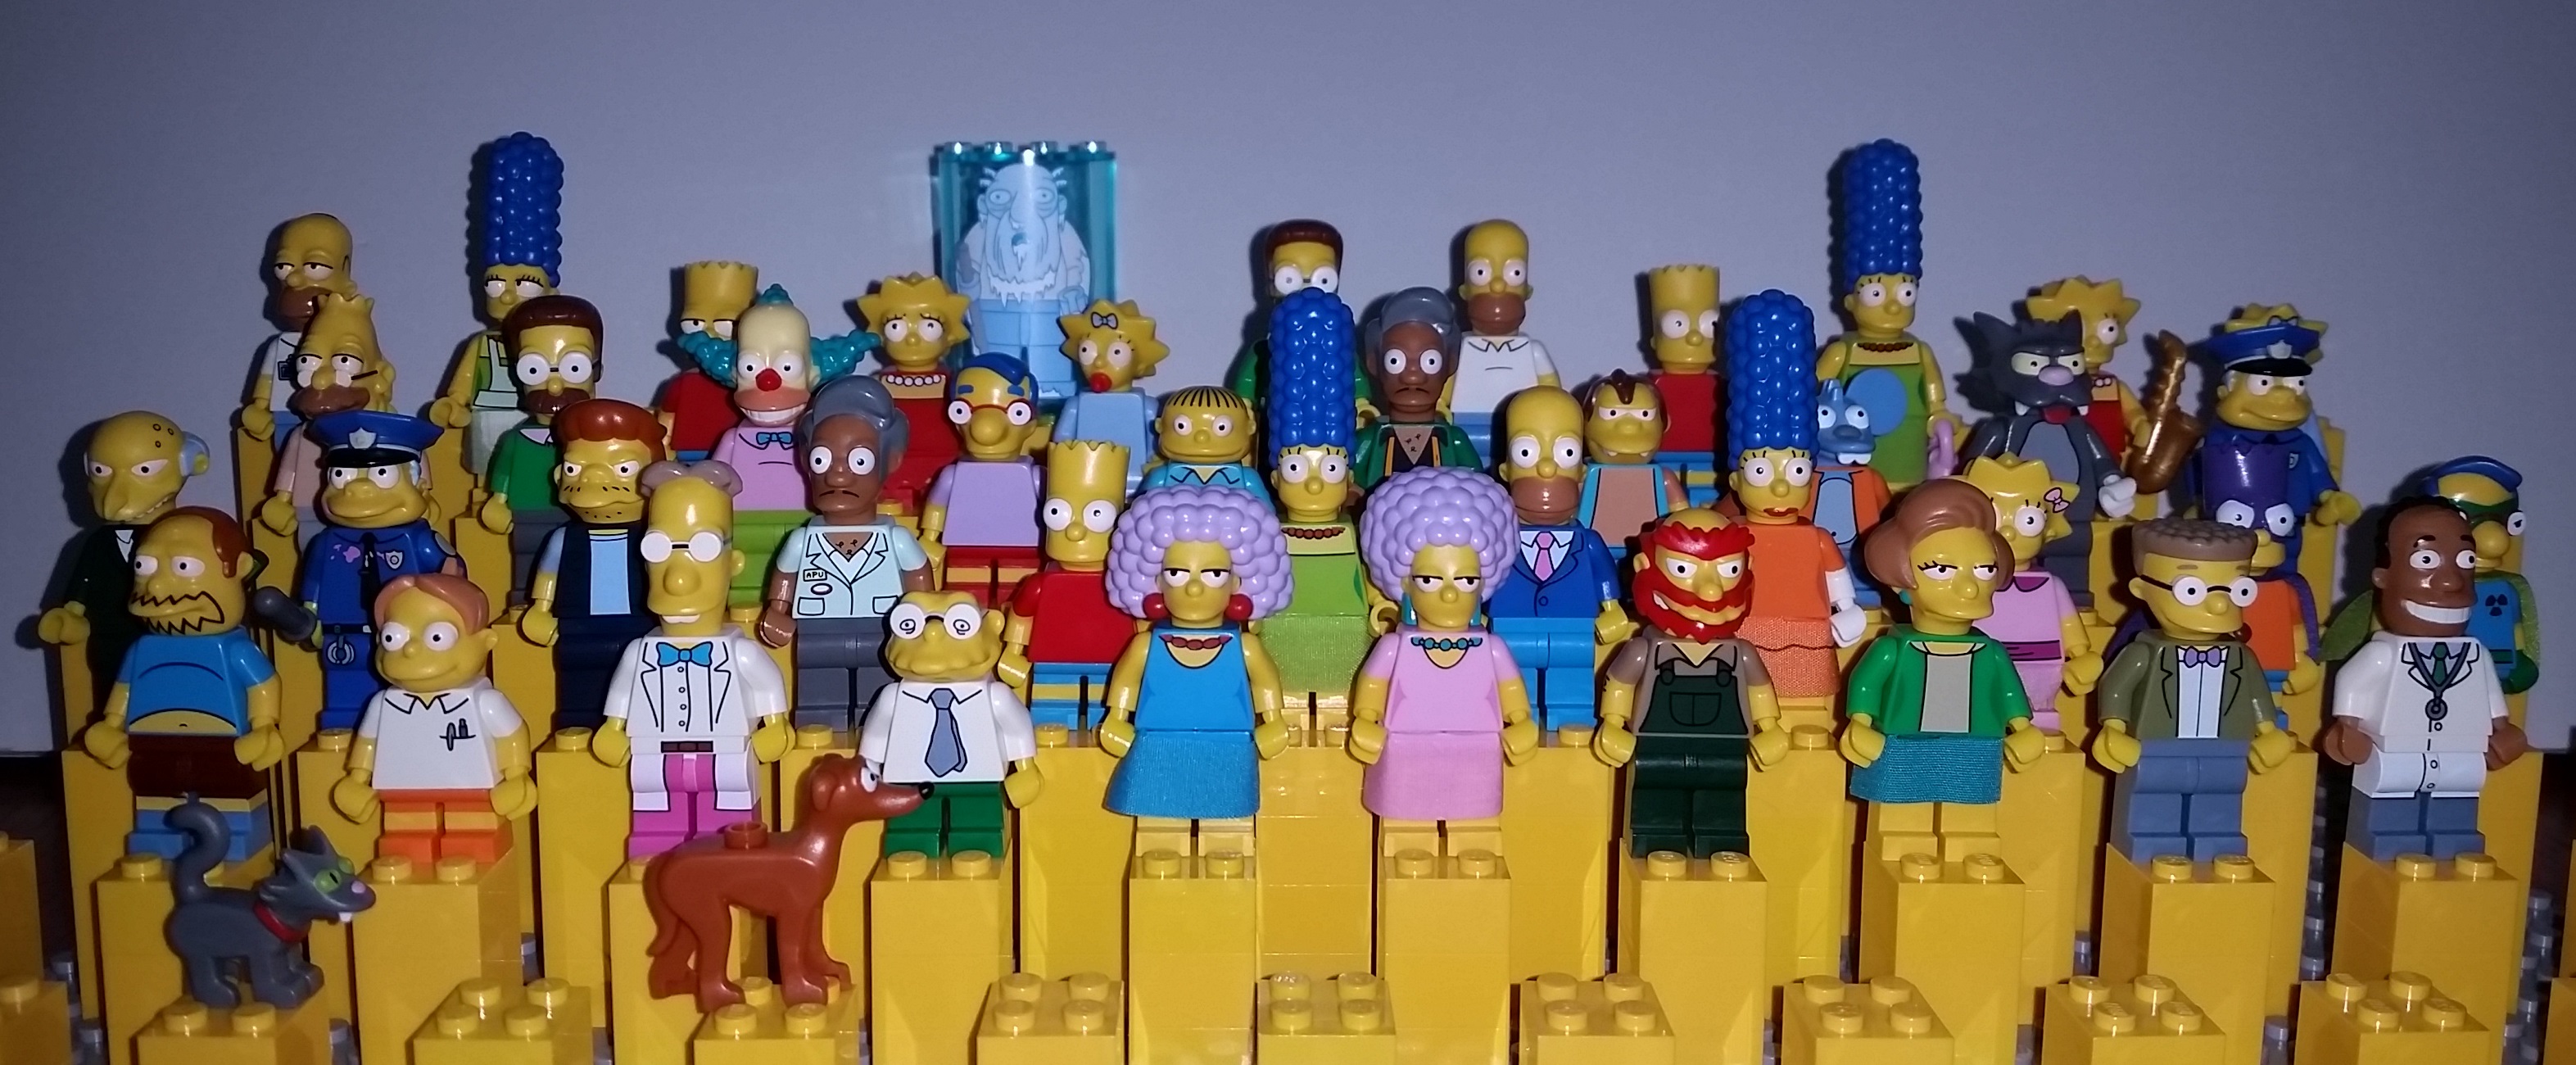 GENUINE LEGO MINIFIGURES VARIOUS SIMPSONS CHOOSE YOUR OWN 